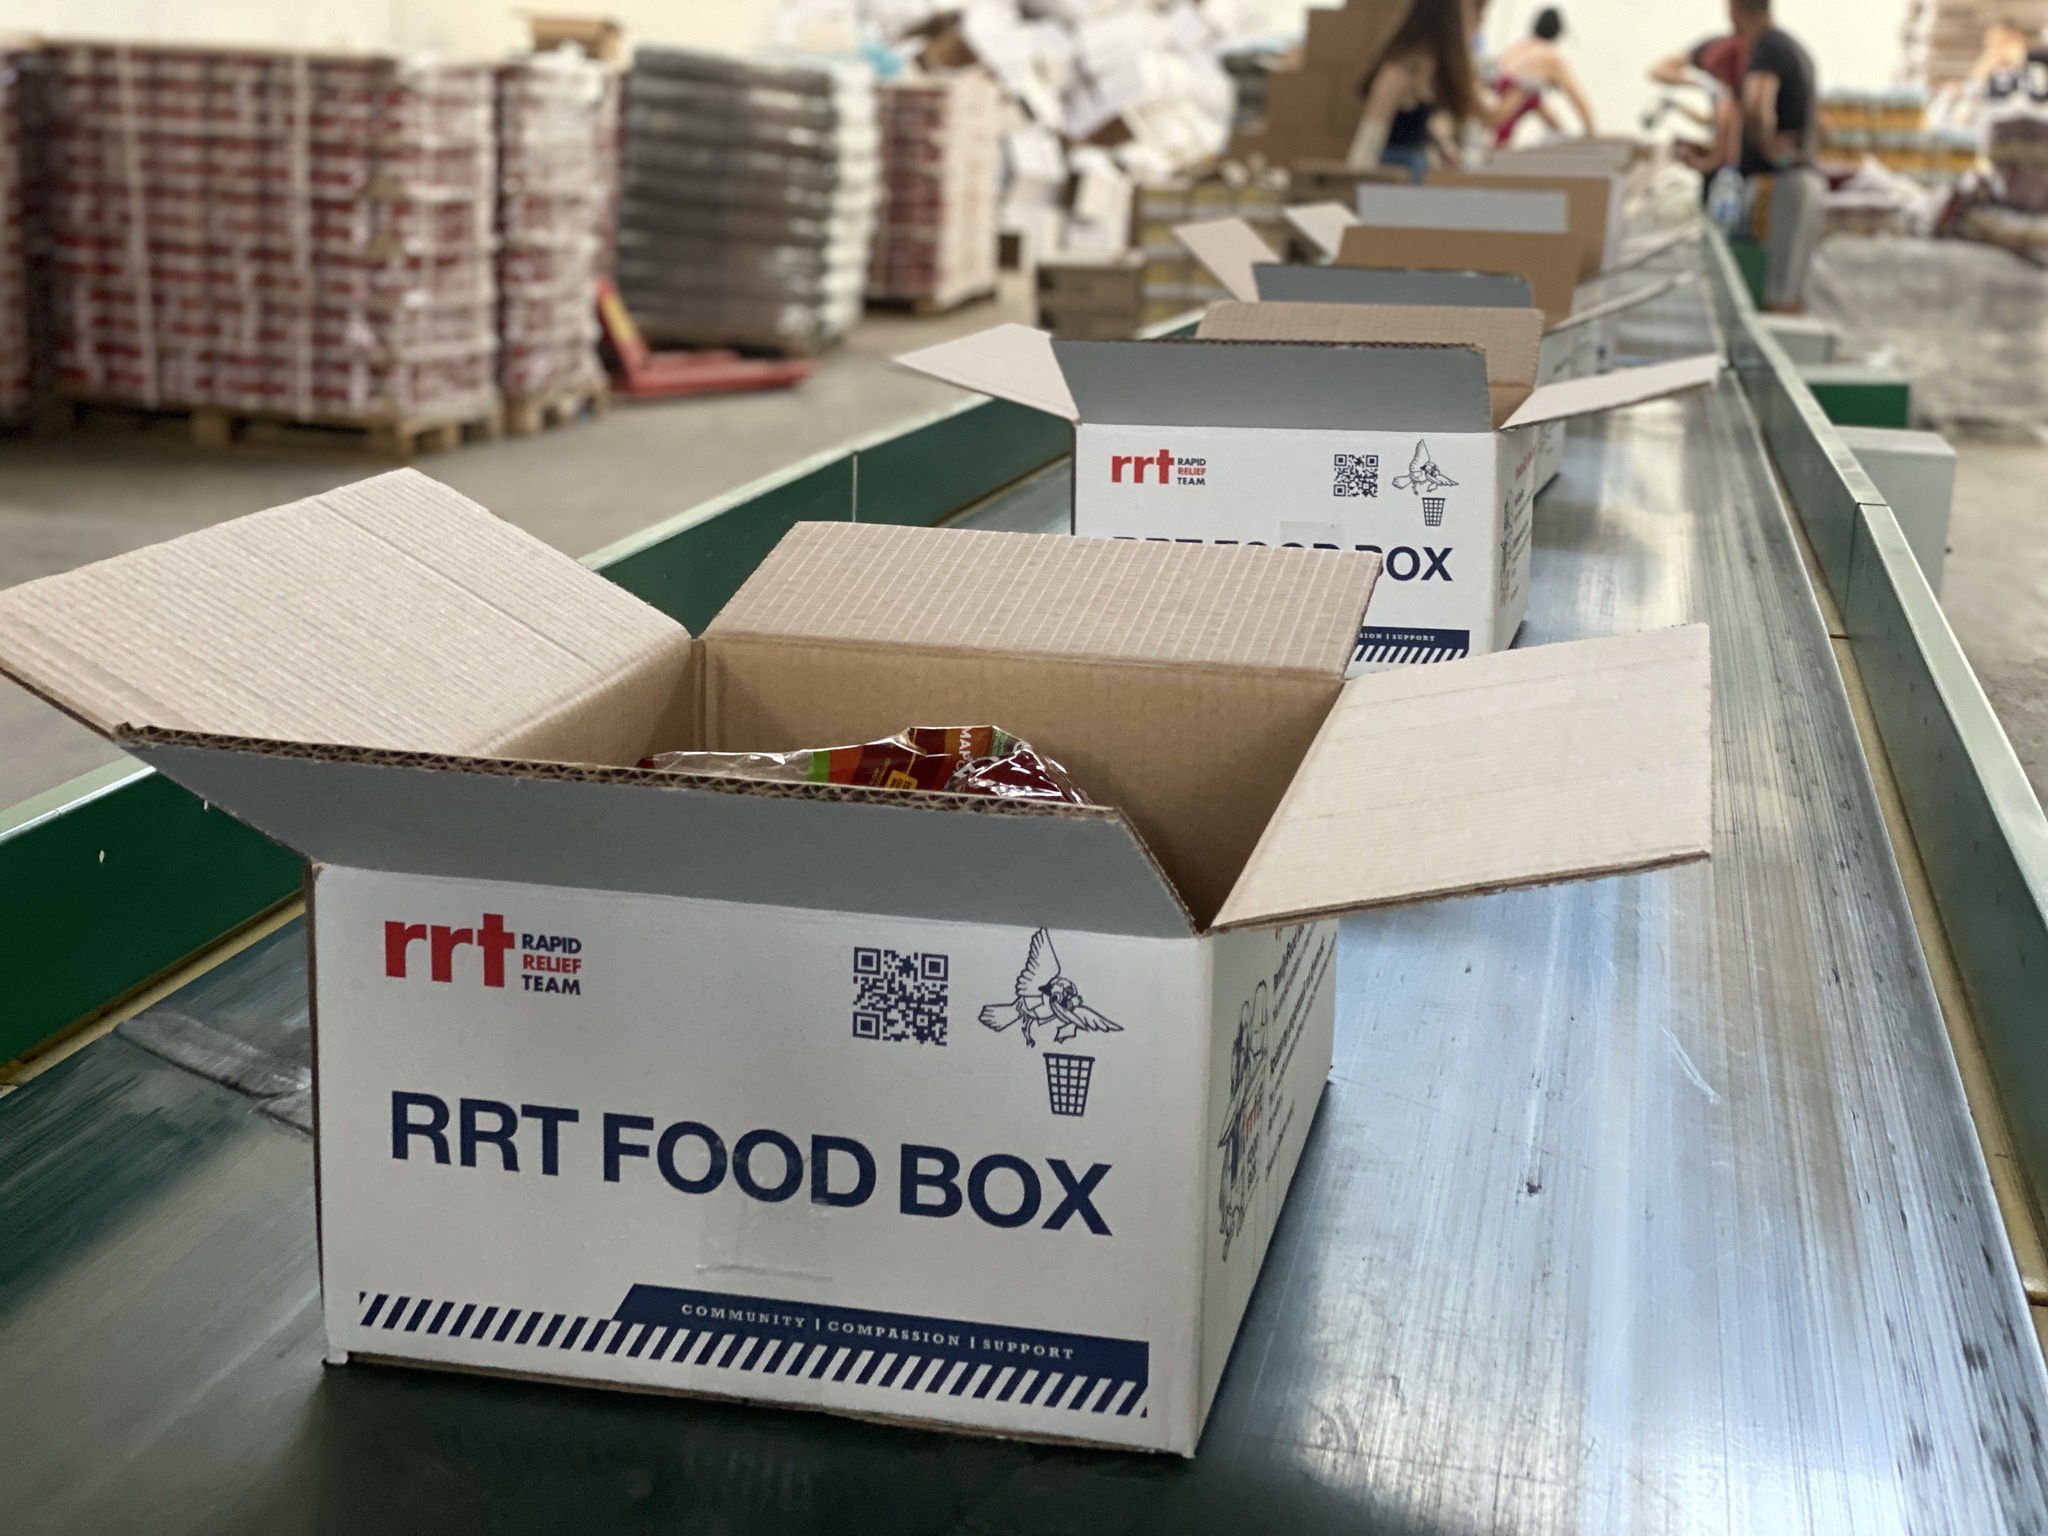 8000 food packages together with RRT